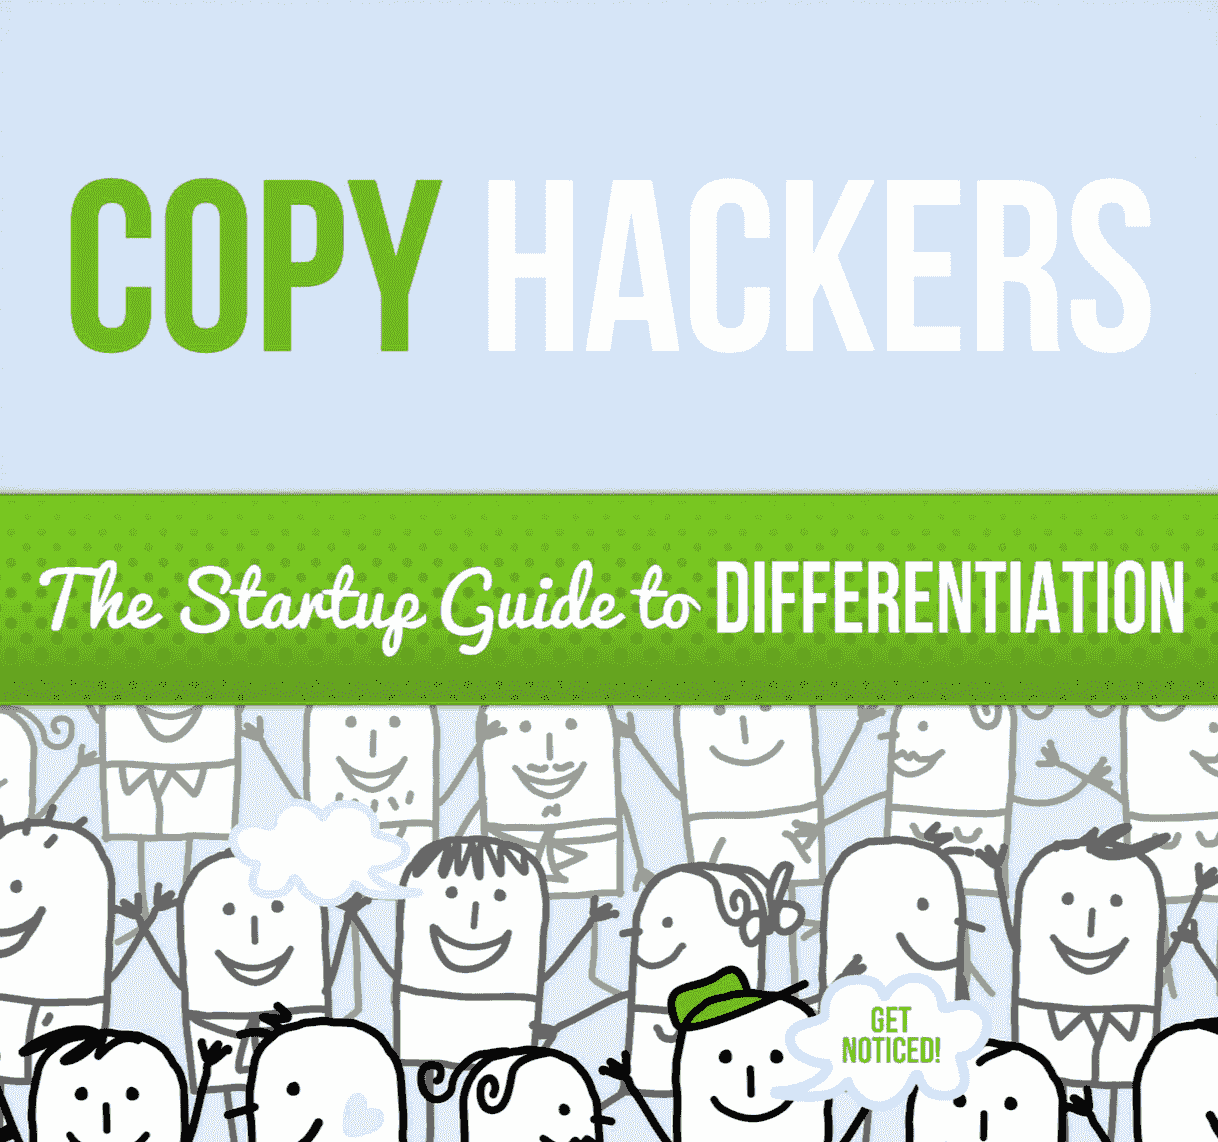 Copyhackers Startup Guide to Differentiation by Joanna Wiebe